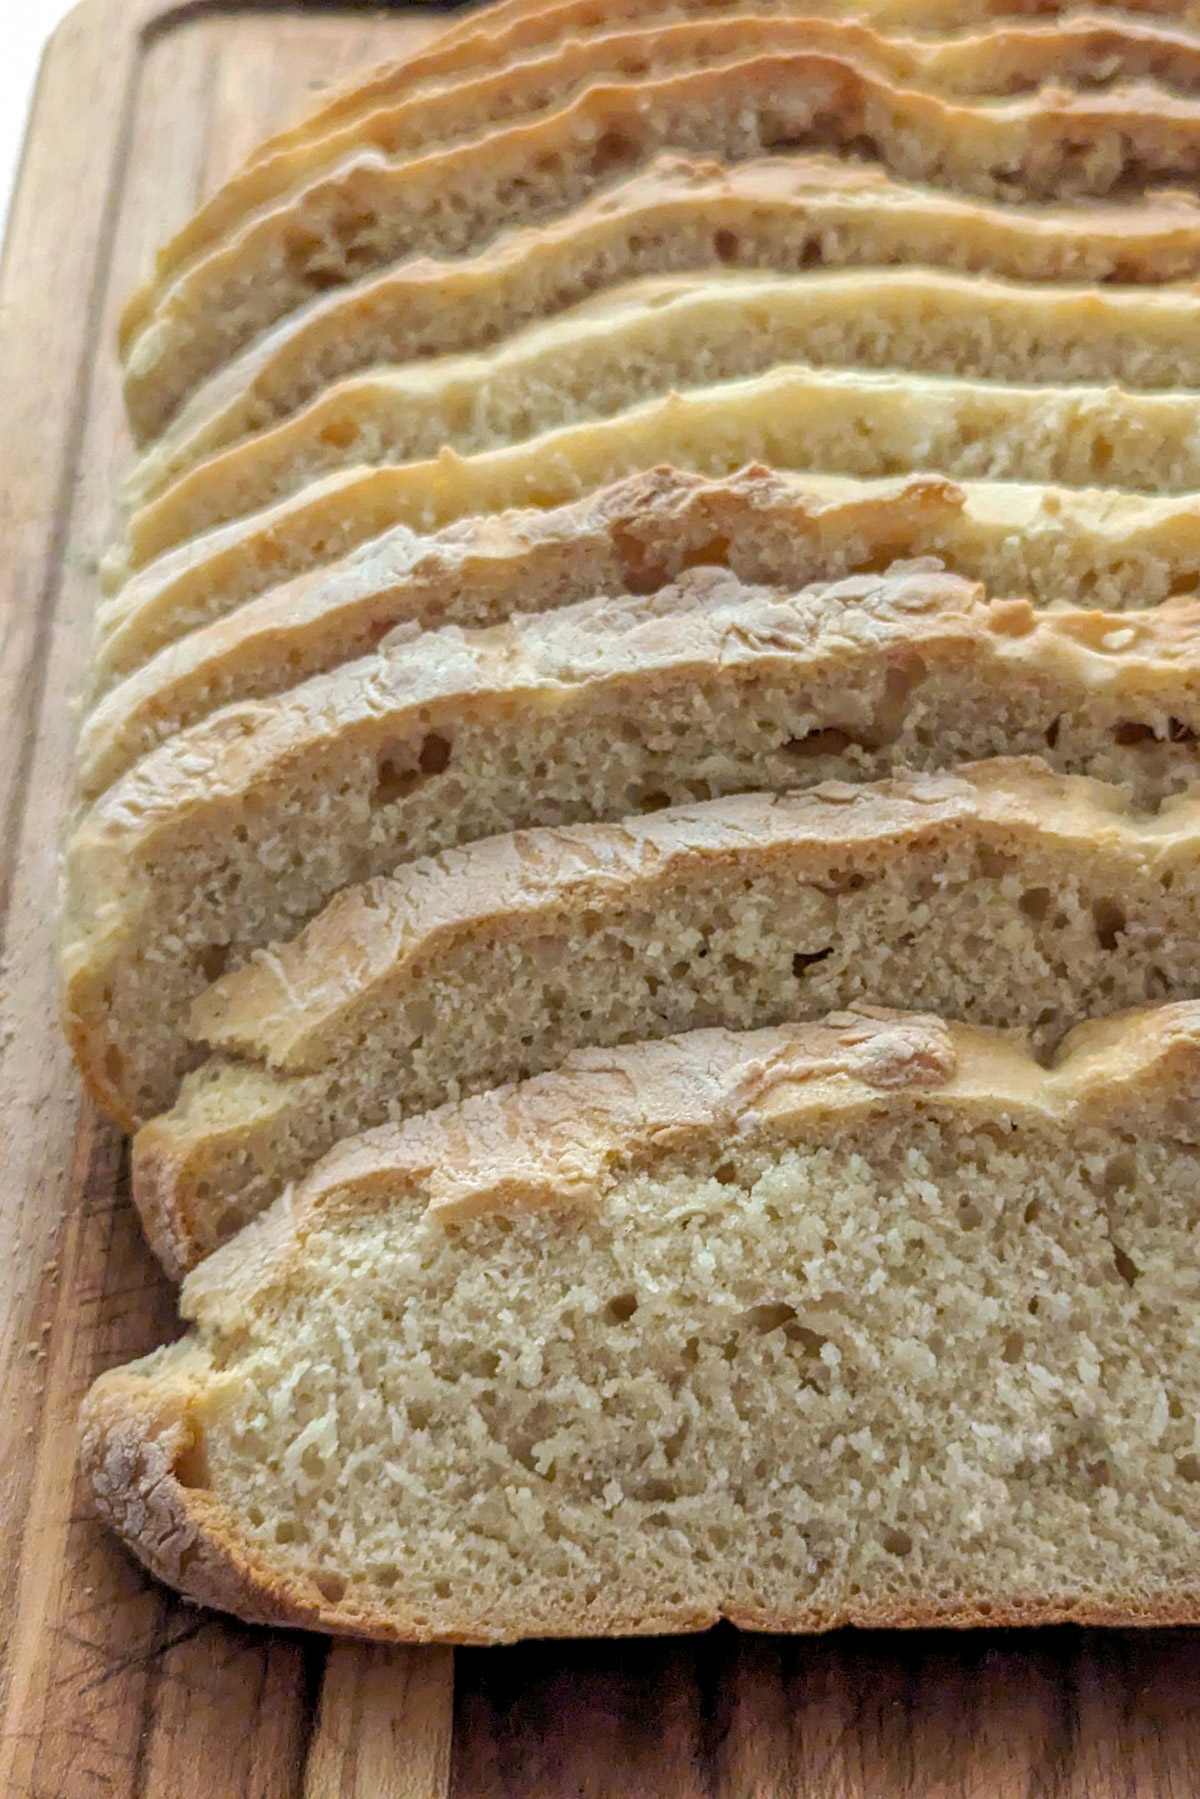 Sliced soda bread without buttermilk.